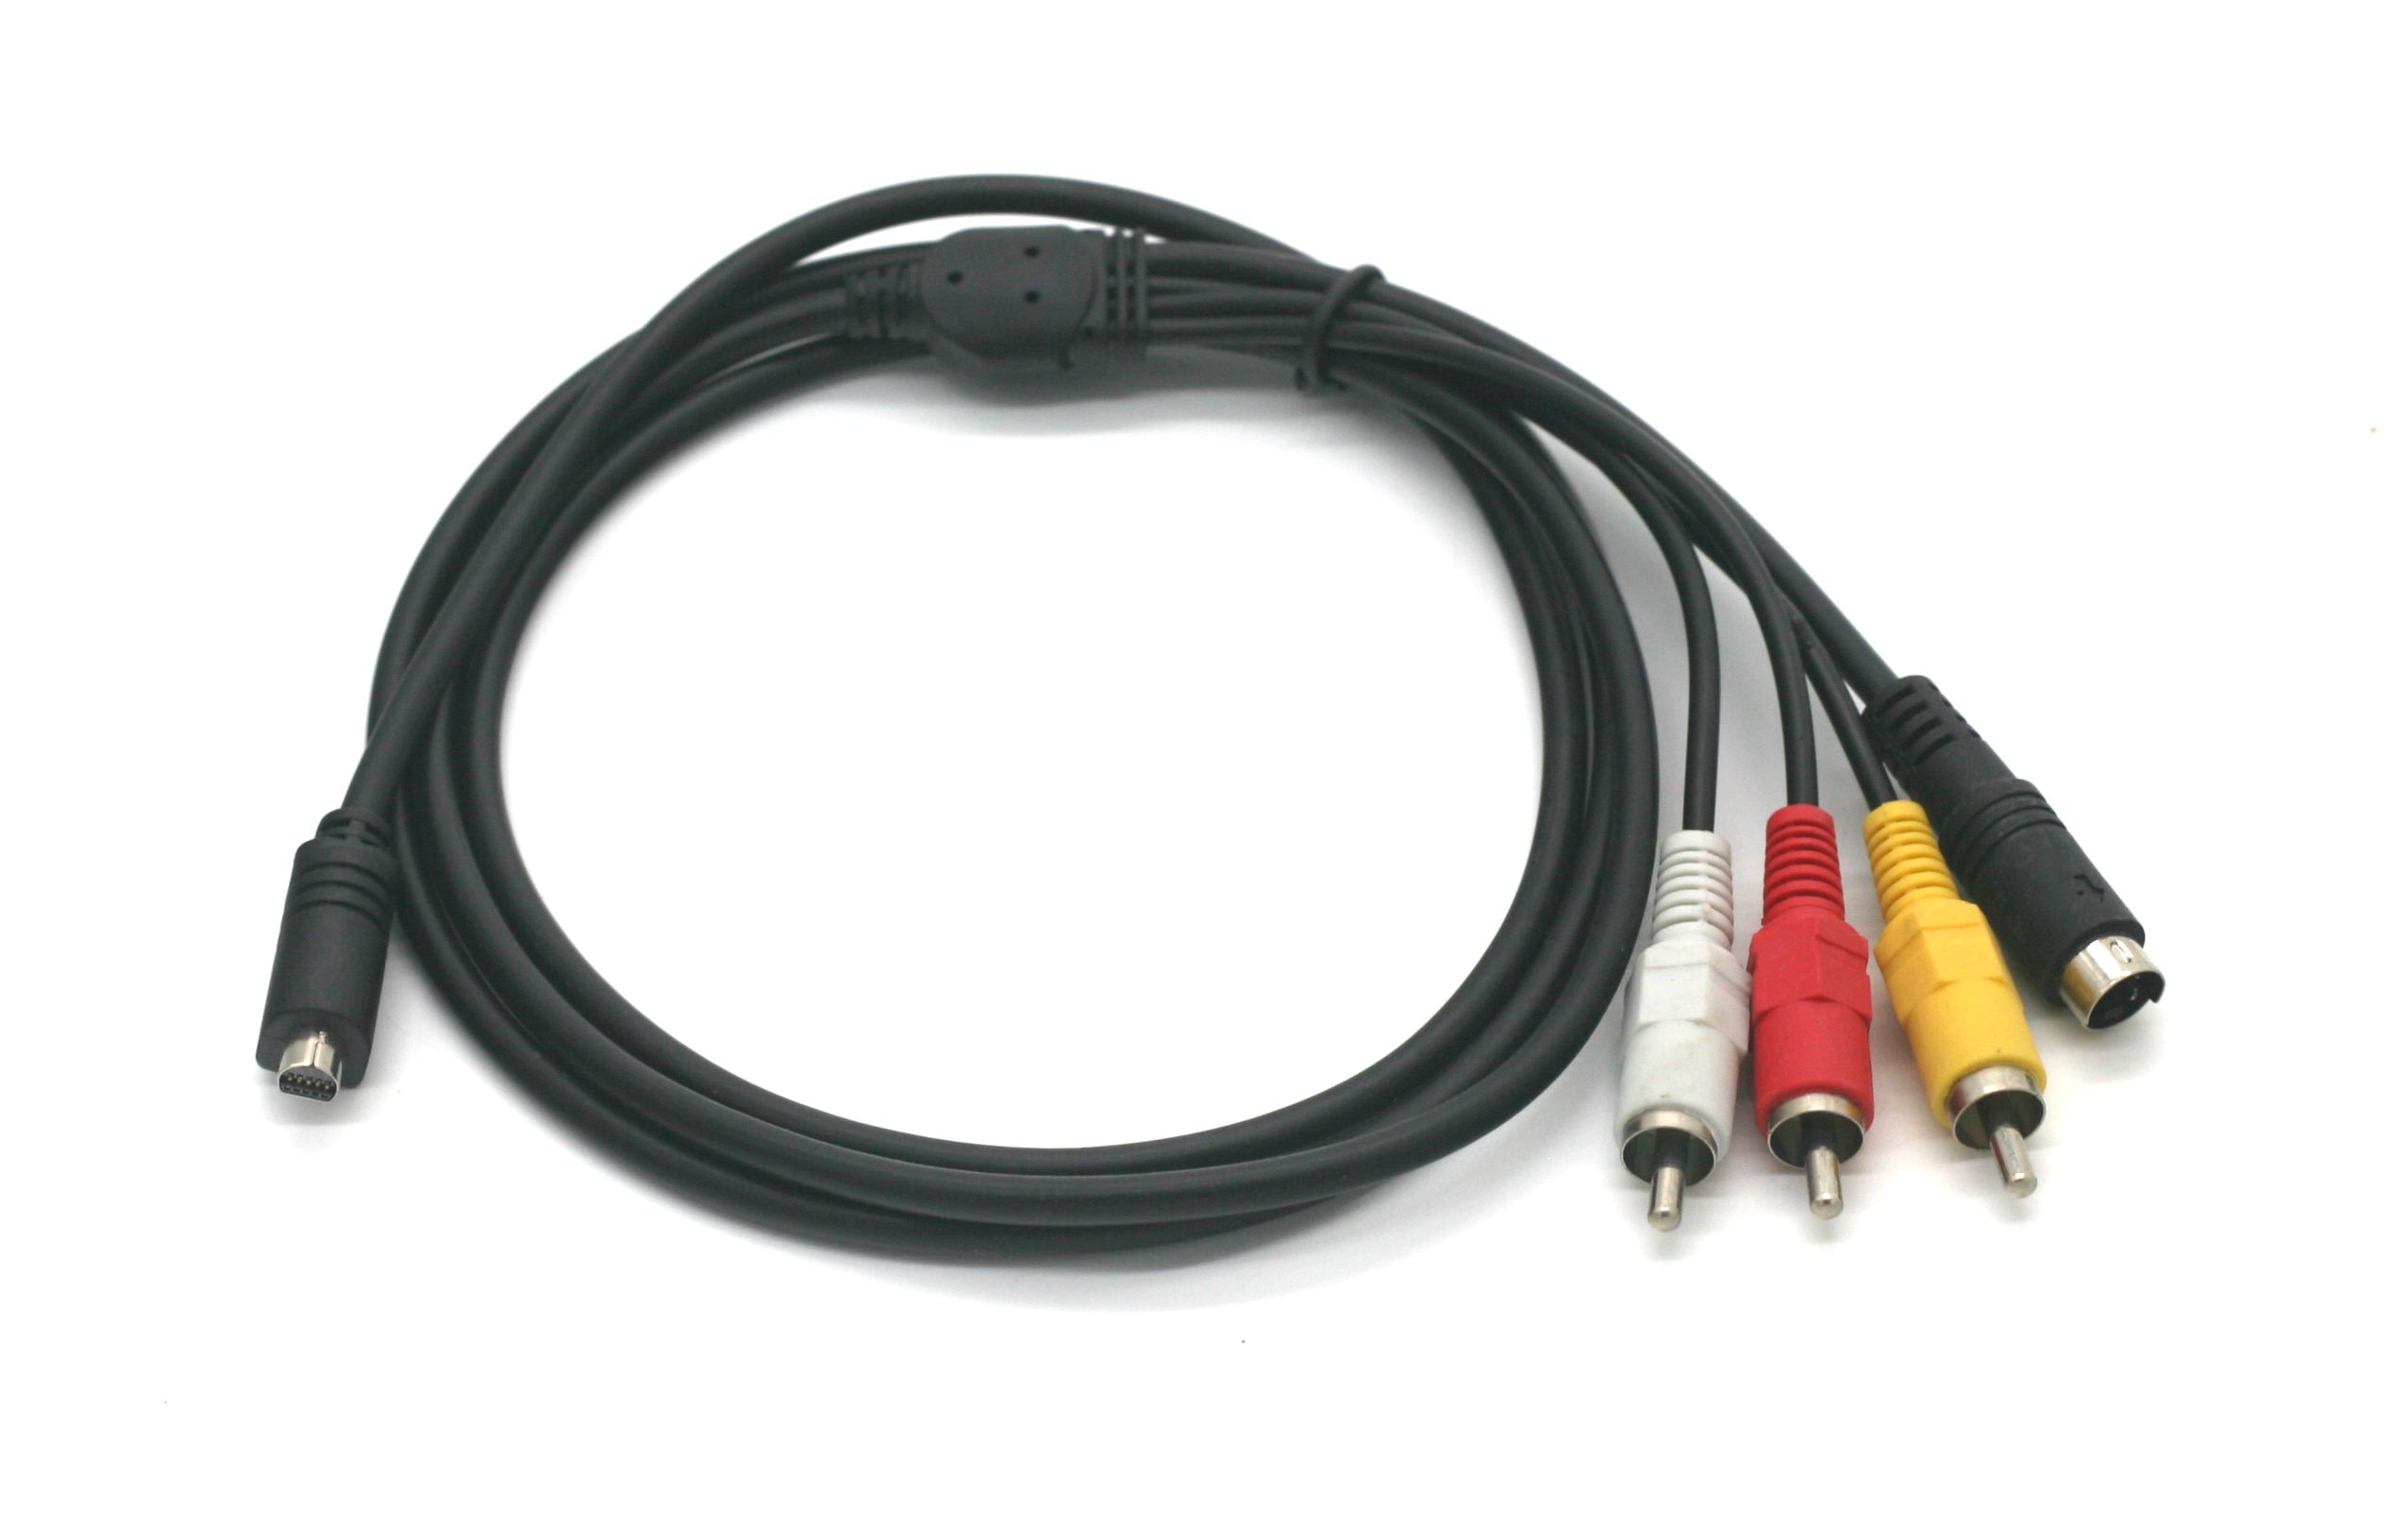 Sony VMC15FS AV Cable for most Sony MiniDV and DVD Camcorders Compatible